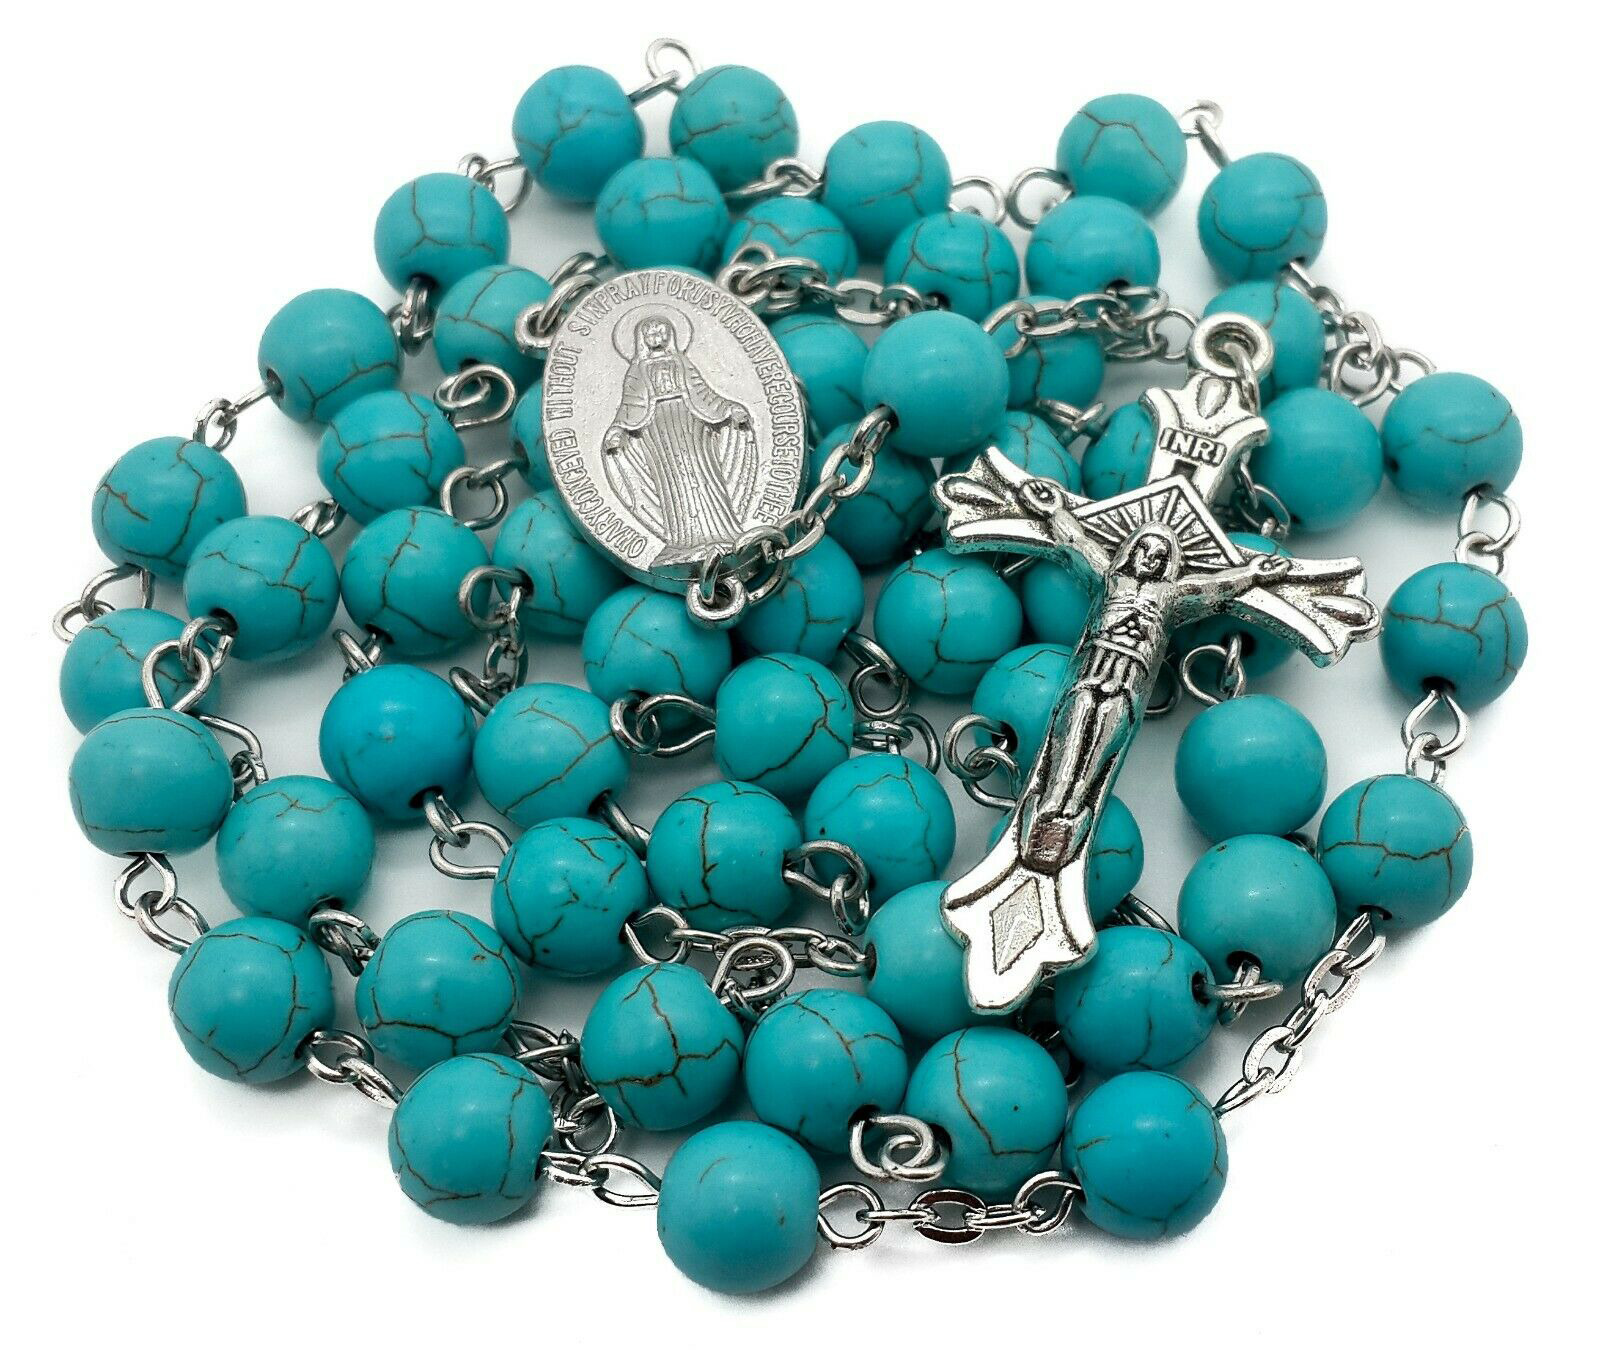 Turquoise Marble Beads Silver Rosary Catholic Necklace Miraculous Medal Cross